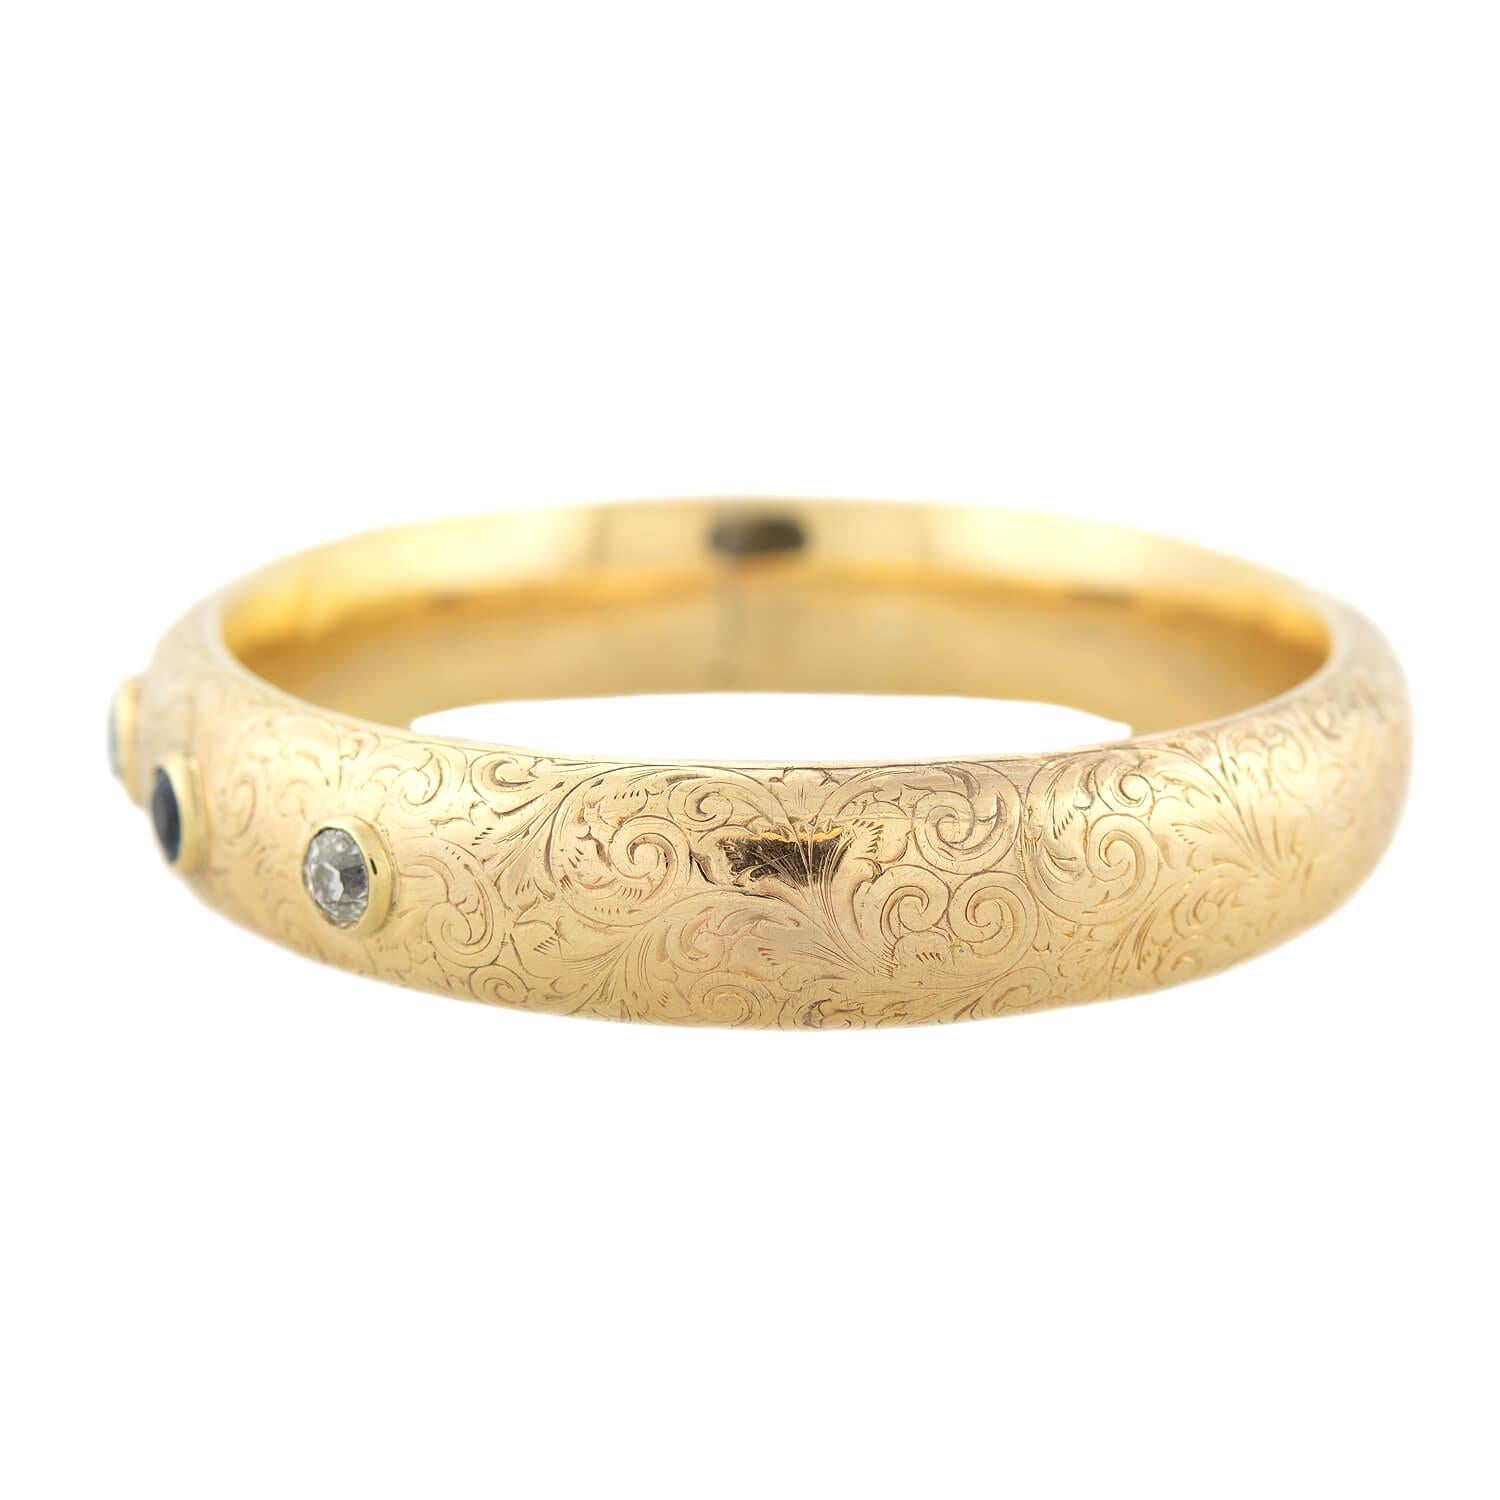 A stunning bangle bracelet from the Art Nouveau (ca1900s) era! Crafted in vibrant 14kt yellow gold, this highly polished bracelet is adorned by five bezel-set gemstones. Three Old Mine Cut diamonds and two rich blue sapphires grace the surface in